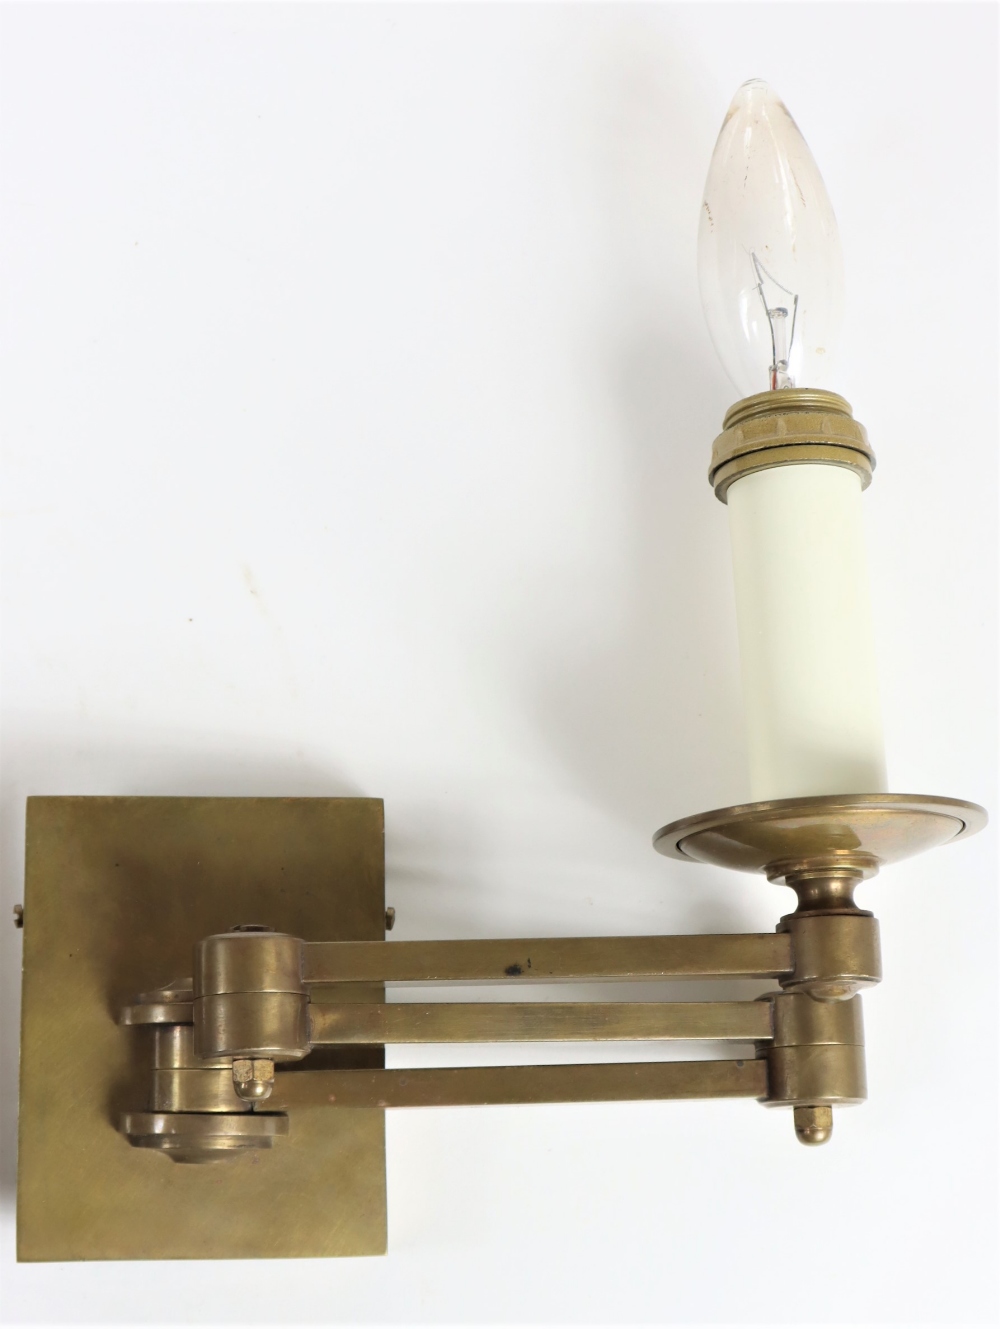 Pair of Electric Candlestick Sconces - Image 3 of 14